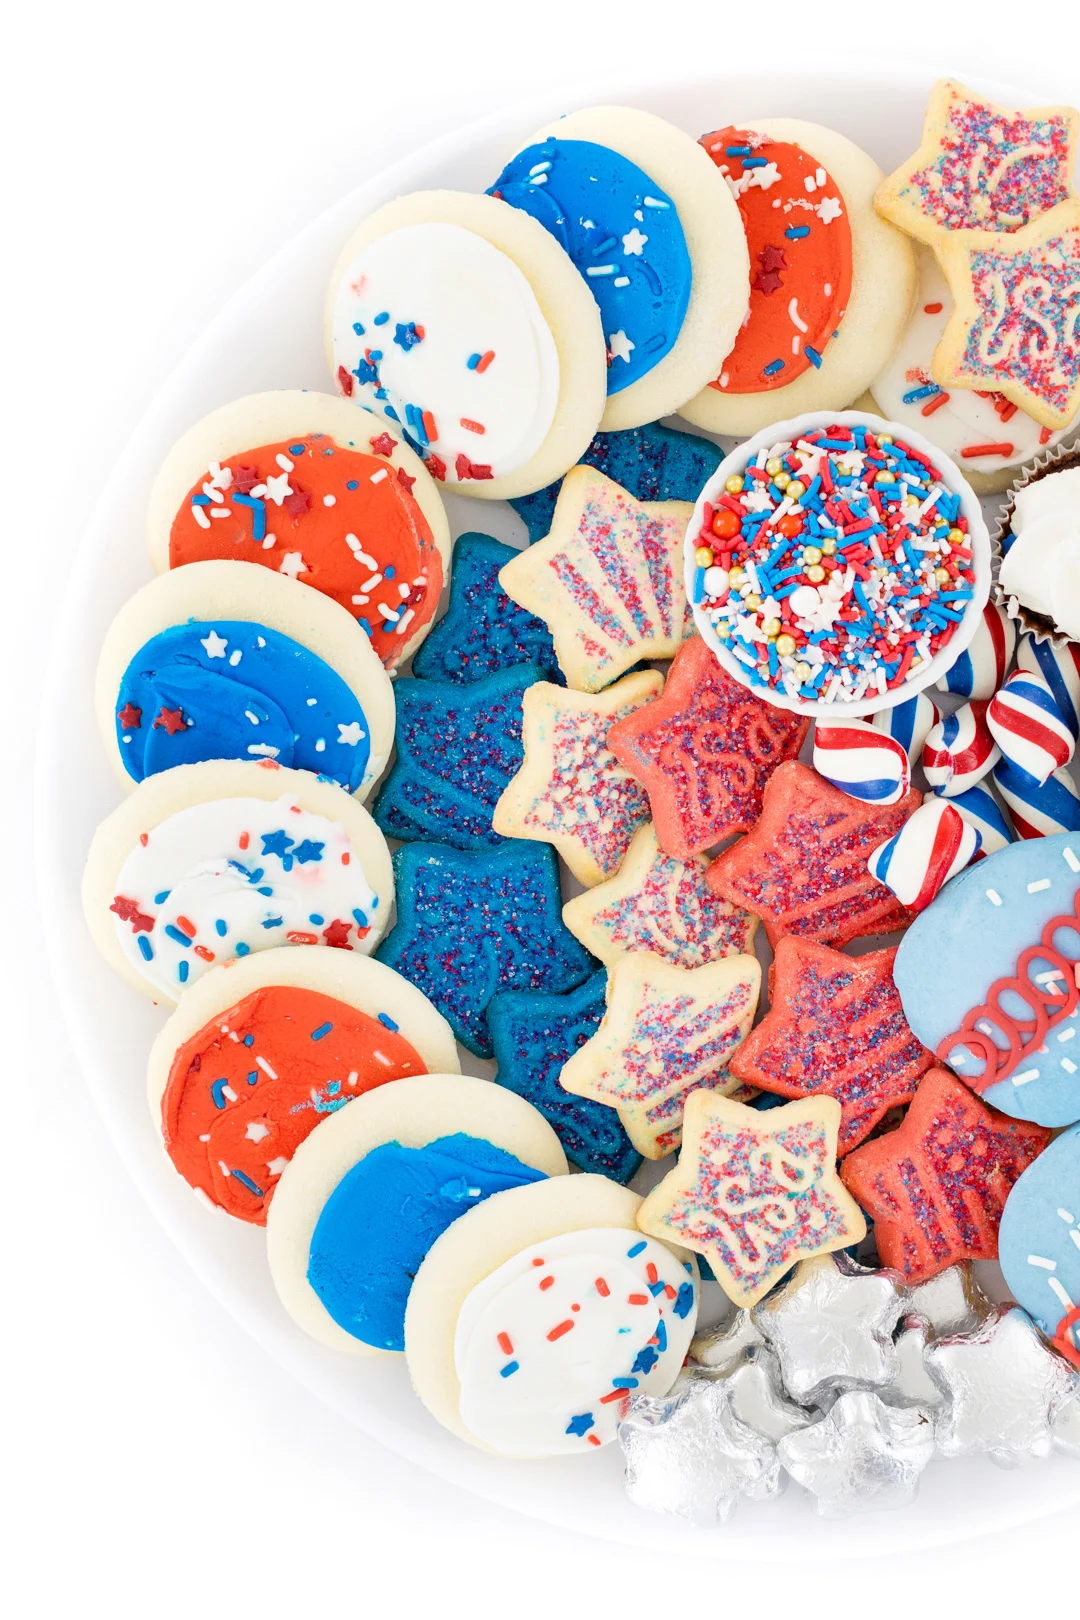 Cookies and treats decorated for patriotic holidays like 4th of july.